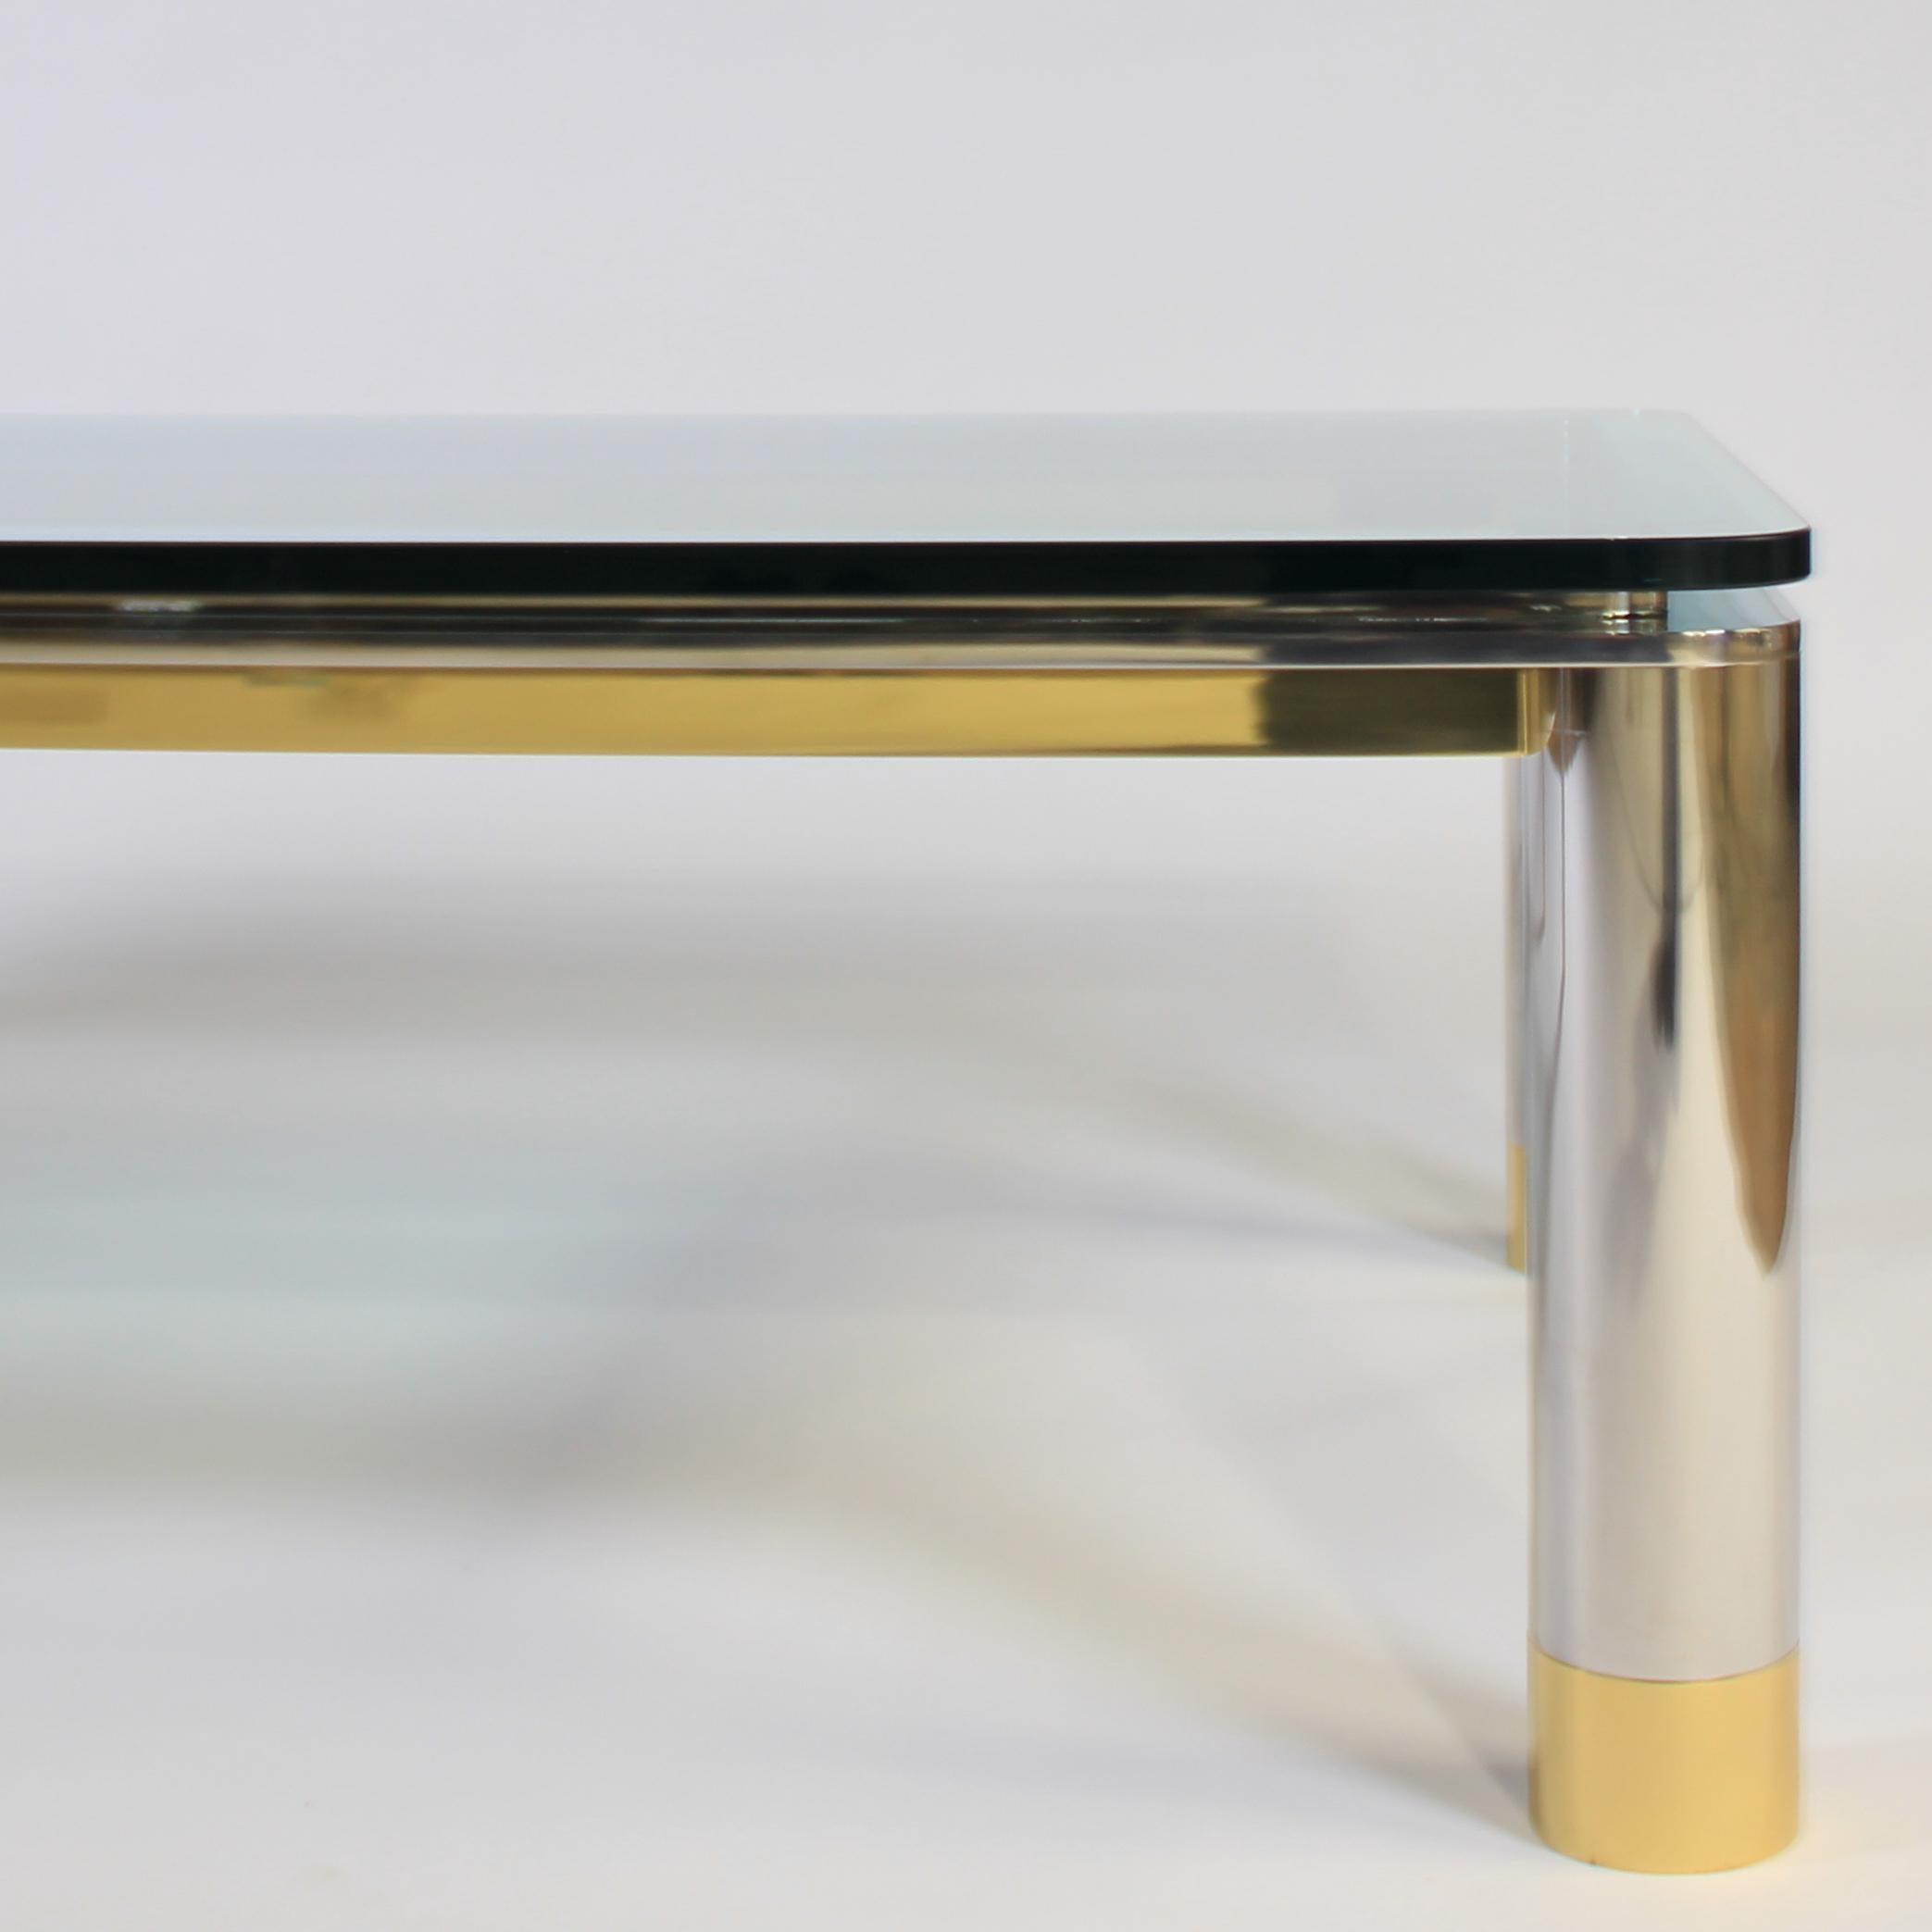 Late 20th Century Polished Stainless Steel, Glass and Brass Coffee Table, circa 1970s